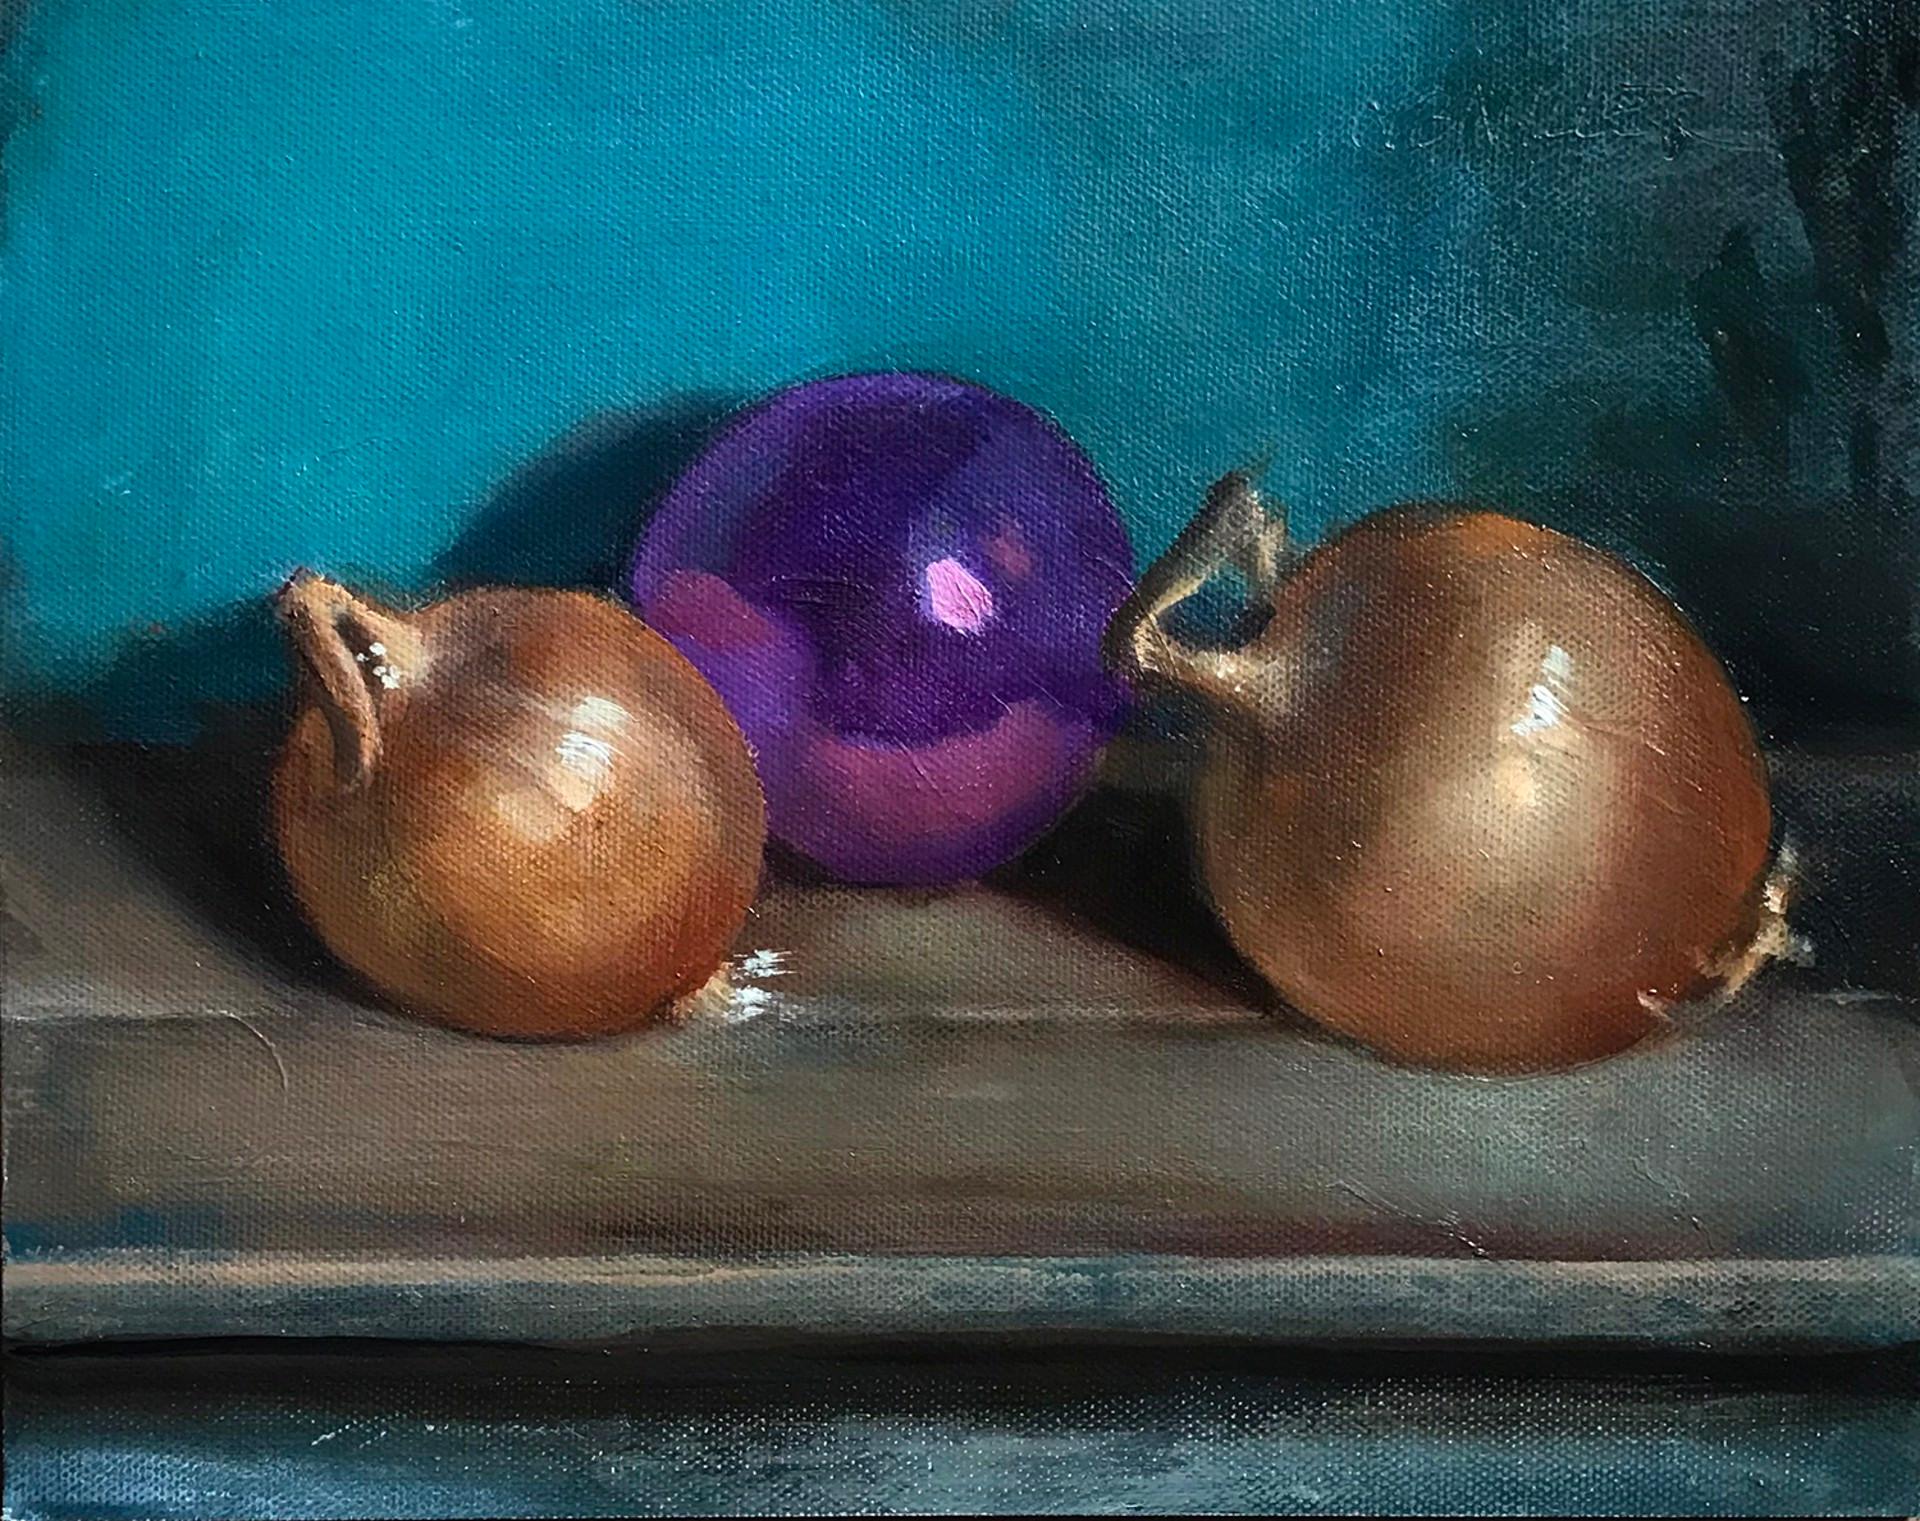 Onions and Ornament - Art by Nancy Bea Miller